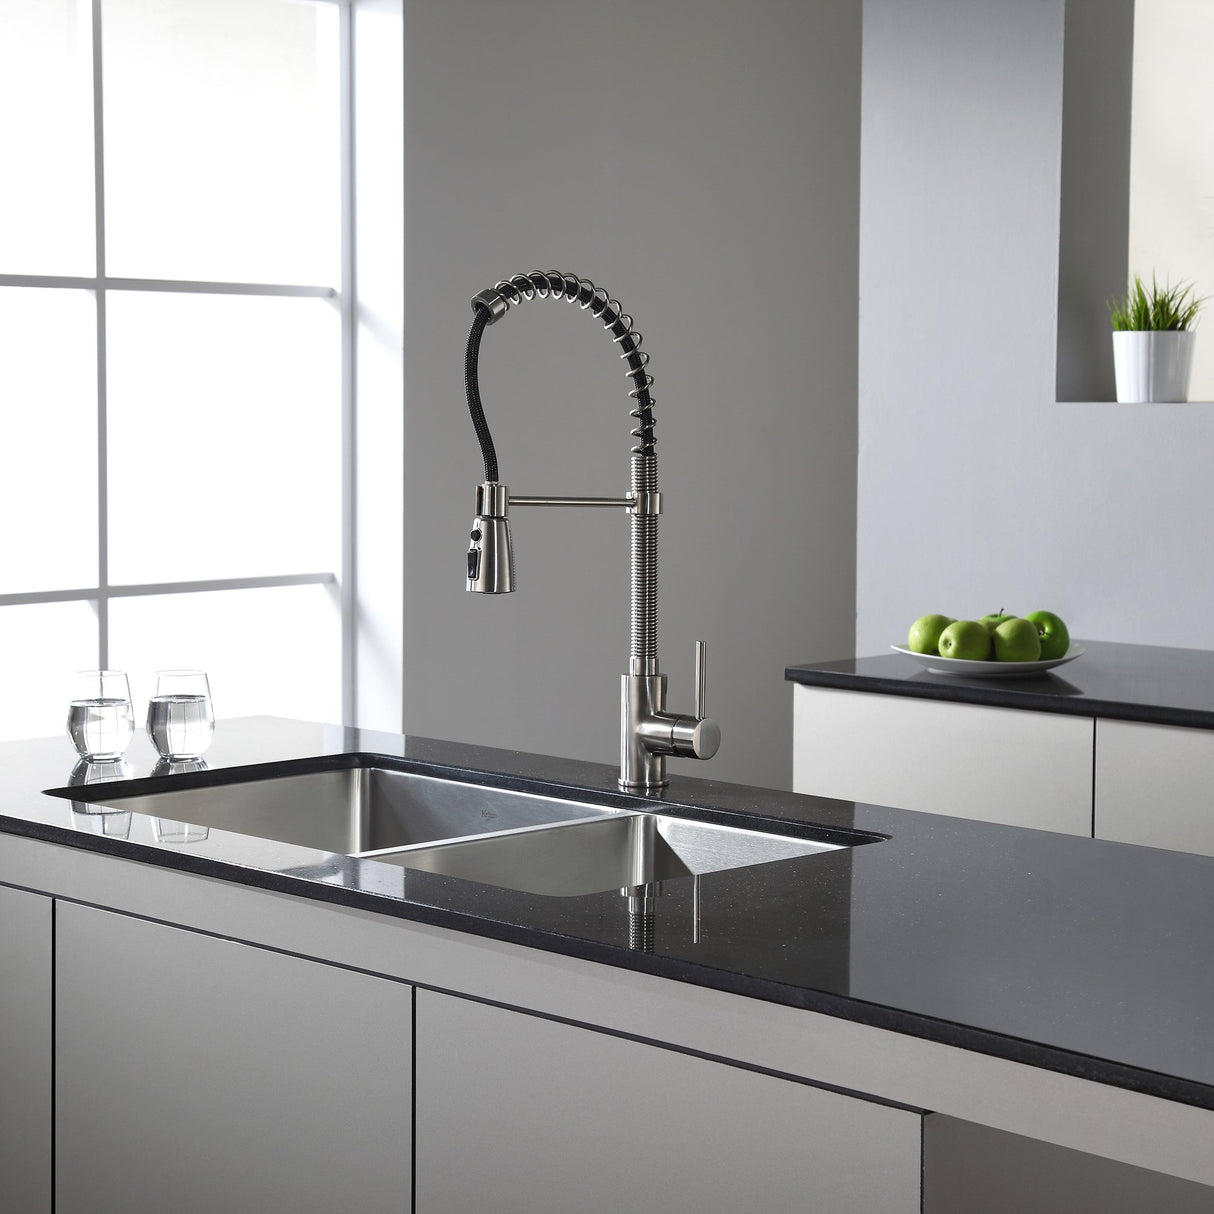 Kraus KPF-1612SS Single Lever Pull Down Kitchen Faucet in Stainless Steel